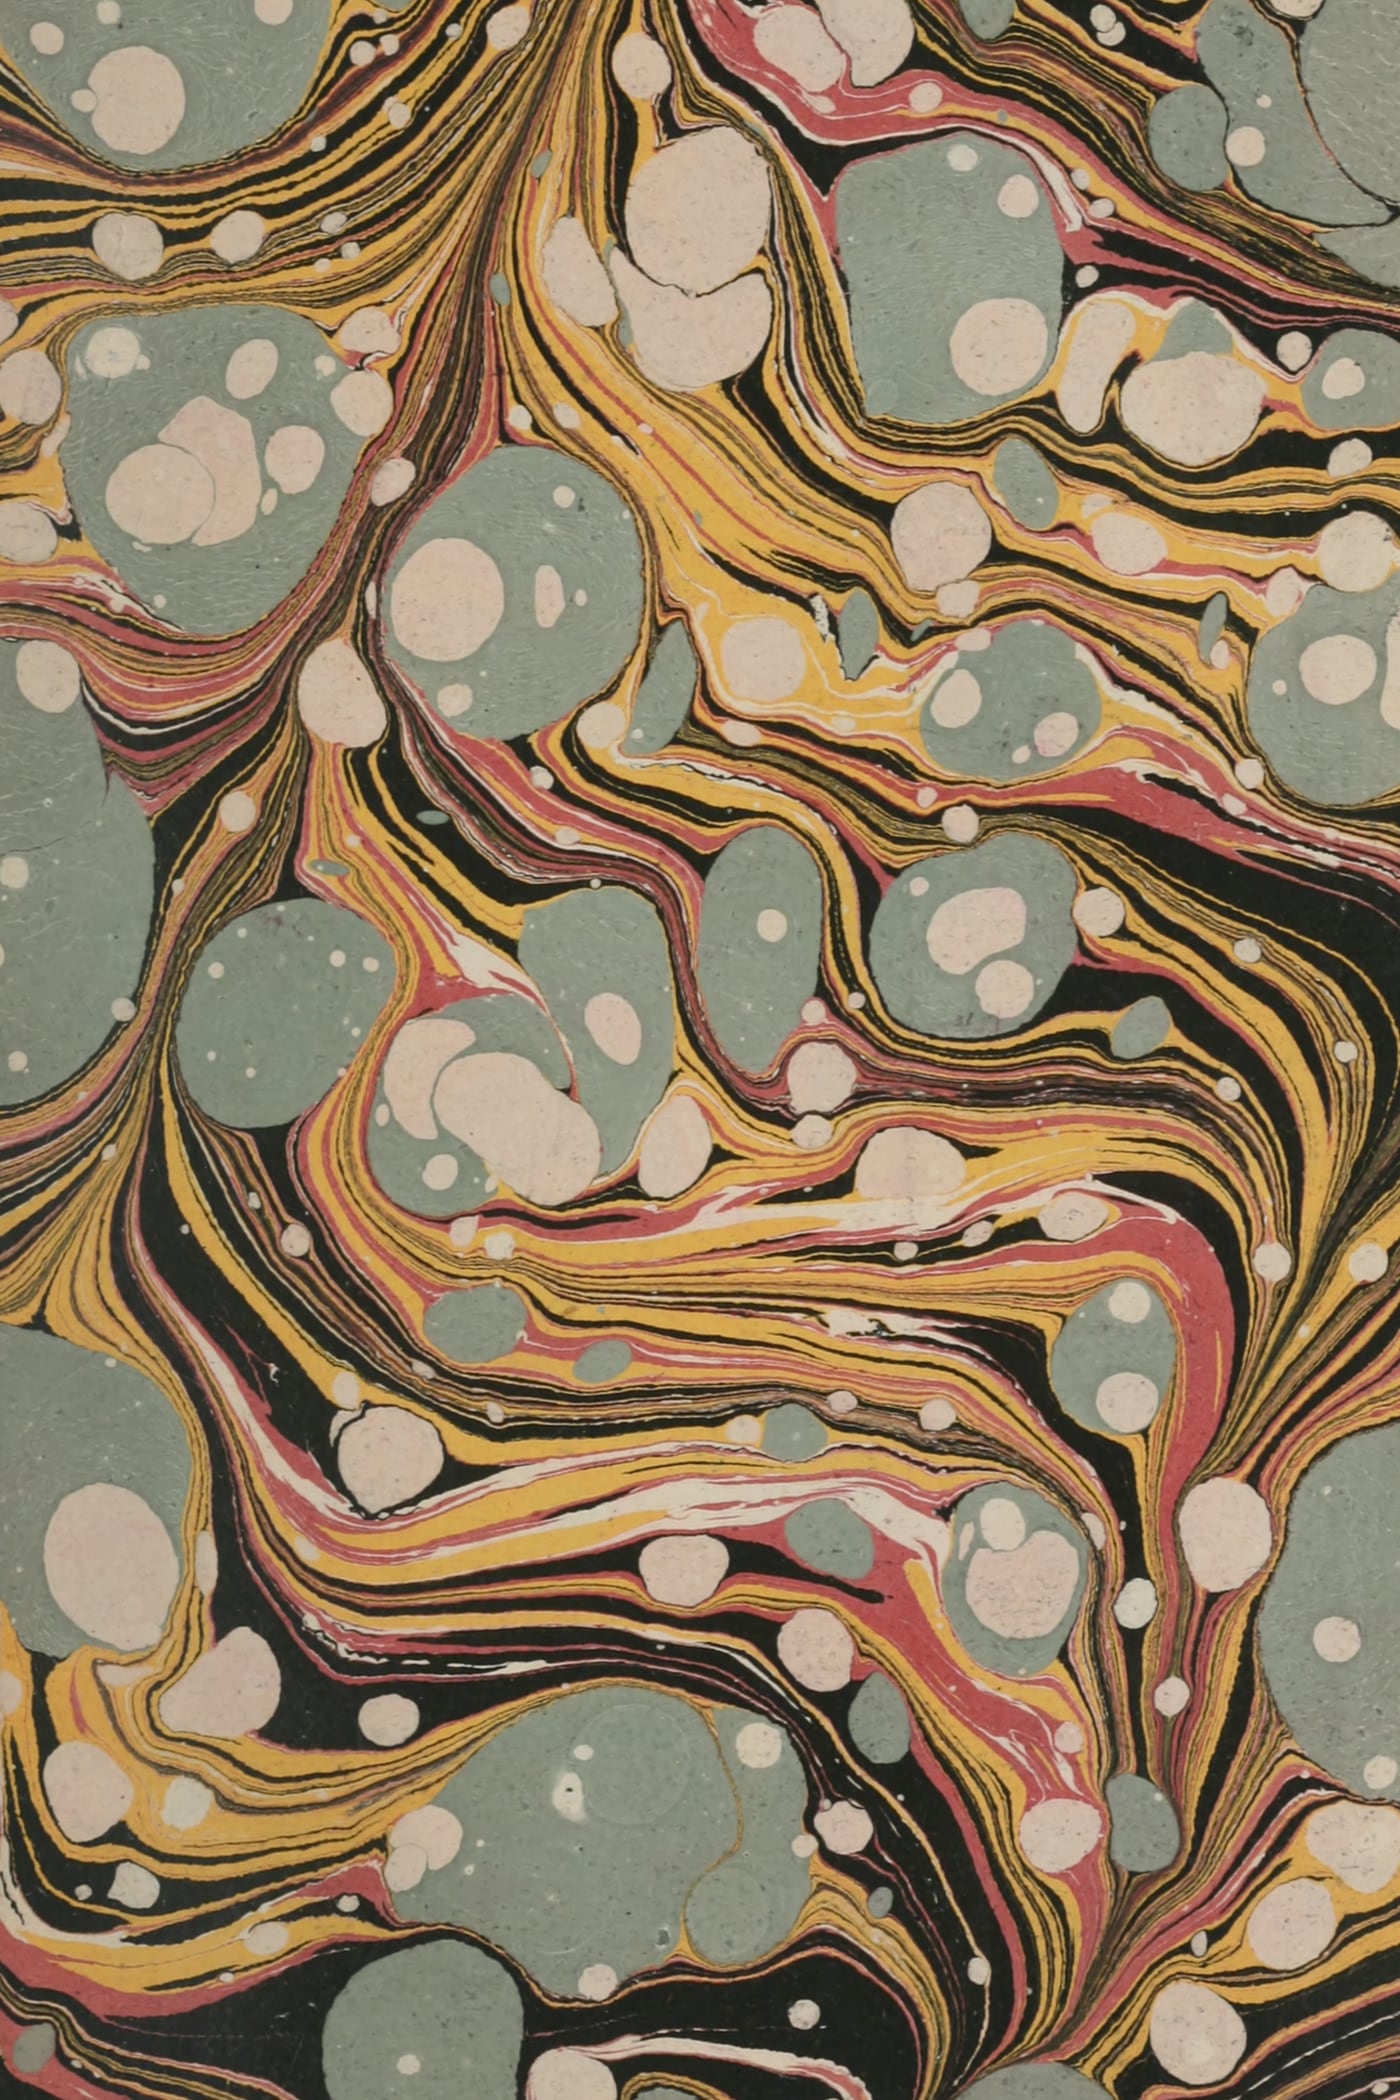 A marbled page.